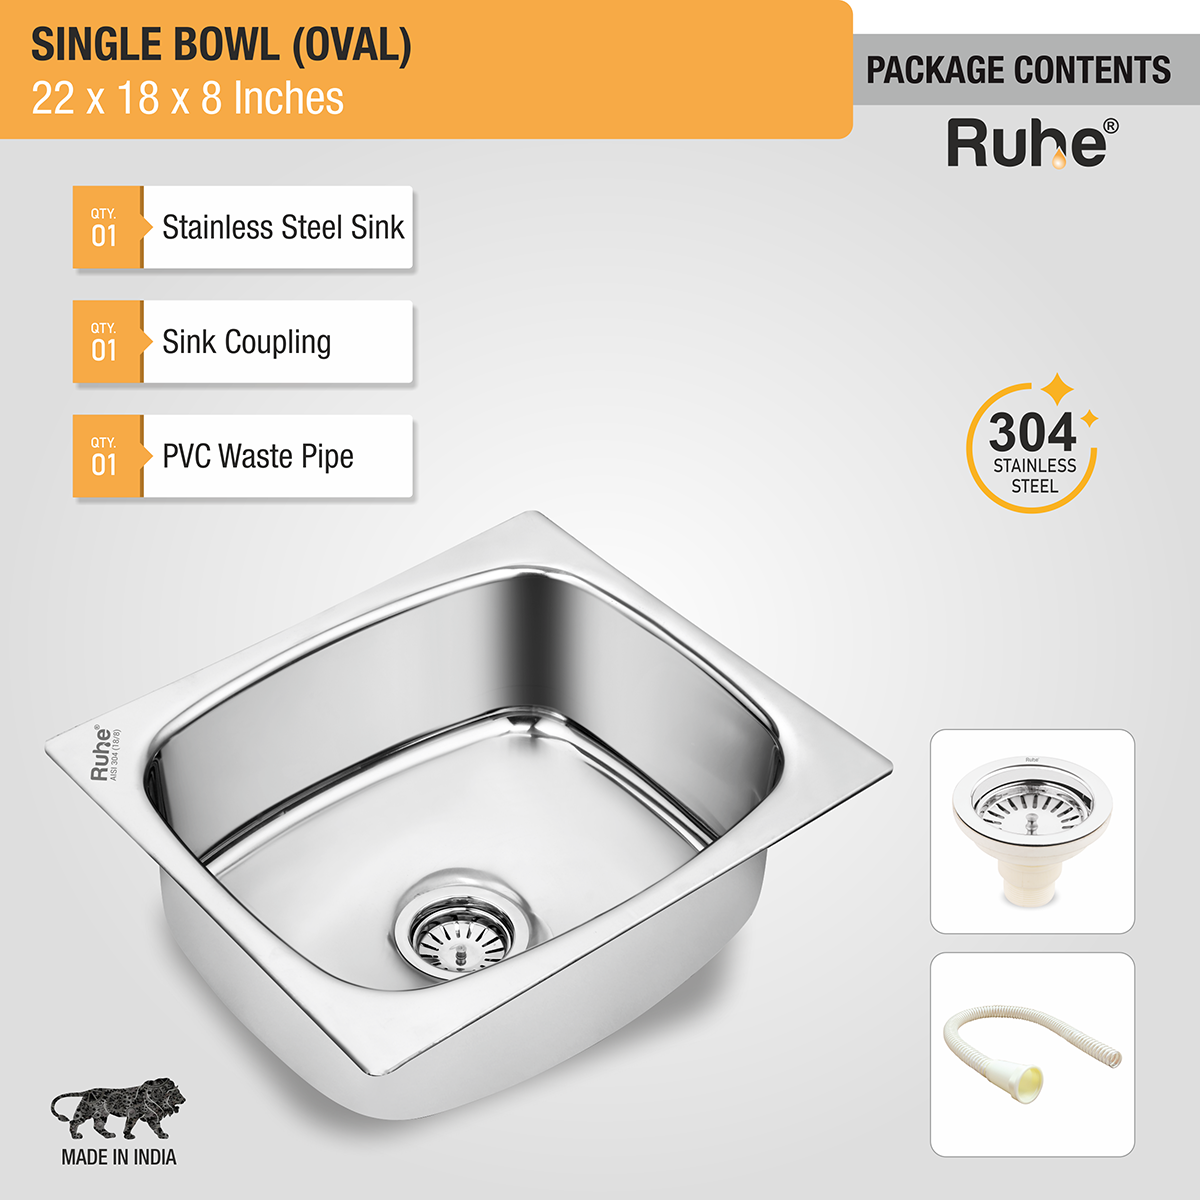 Oval Single Bowl (22 x 18 x 8 inches) 304-Grade Kitchen Sink with coupling, waste pipe